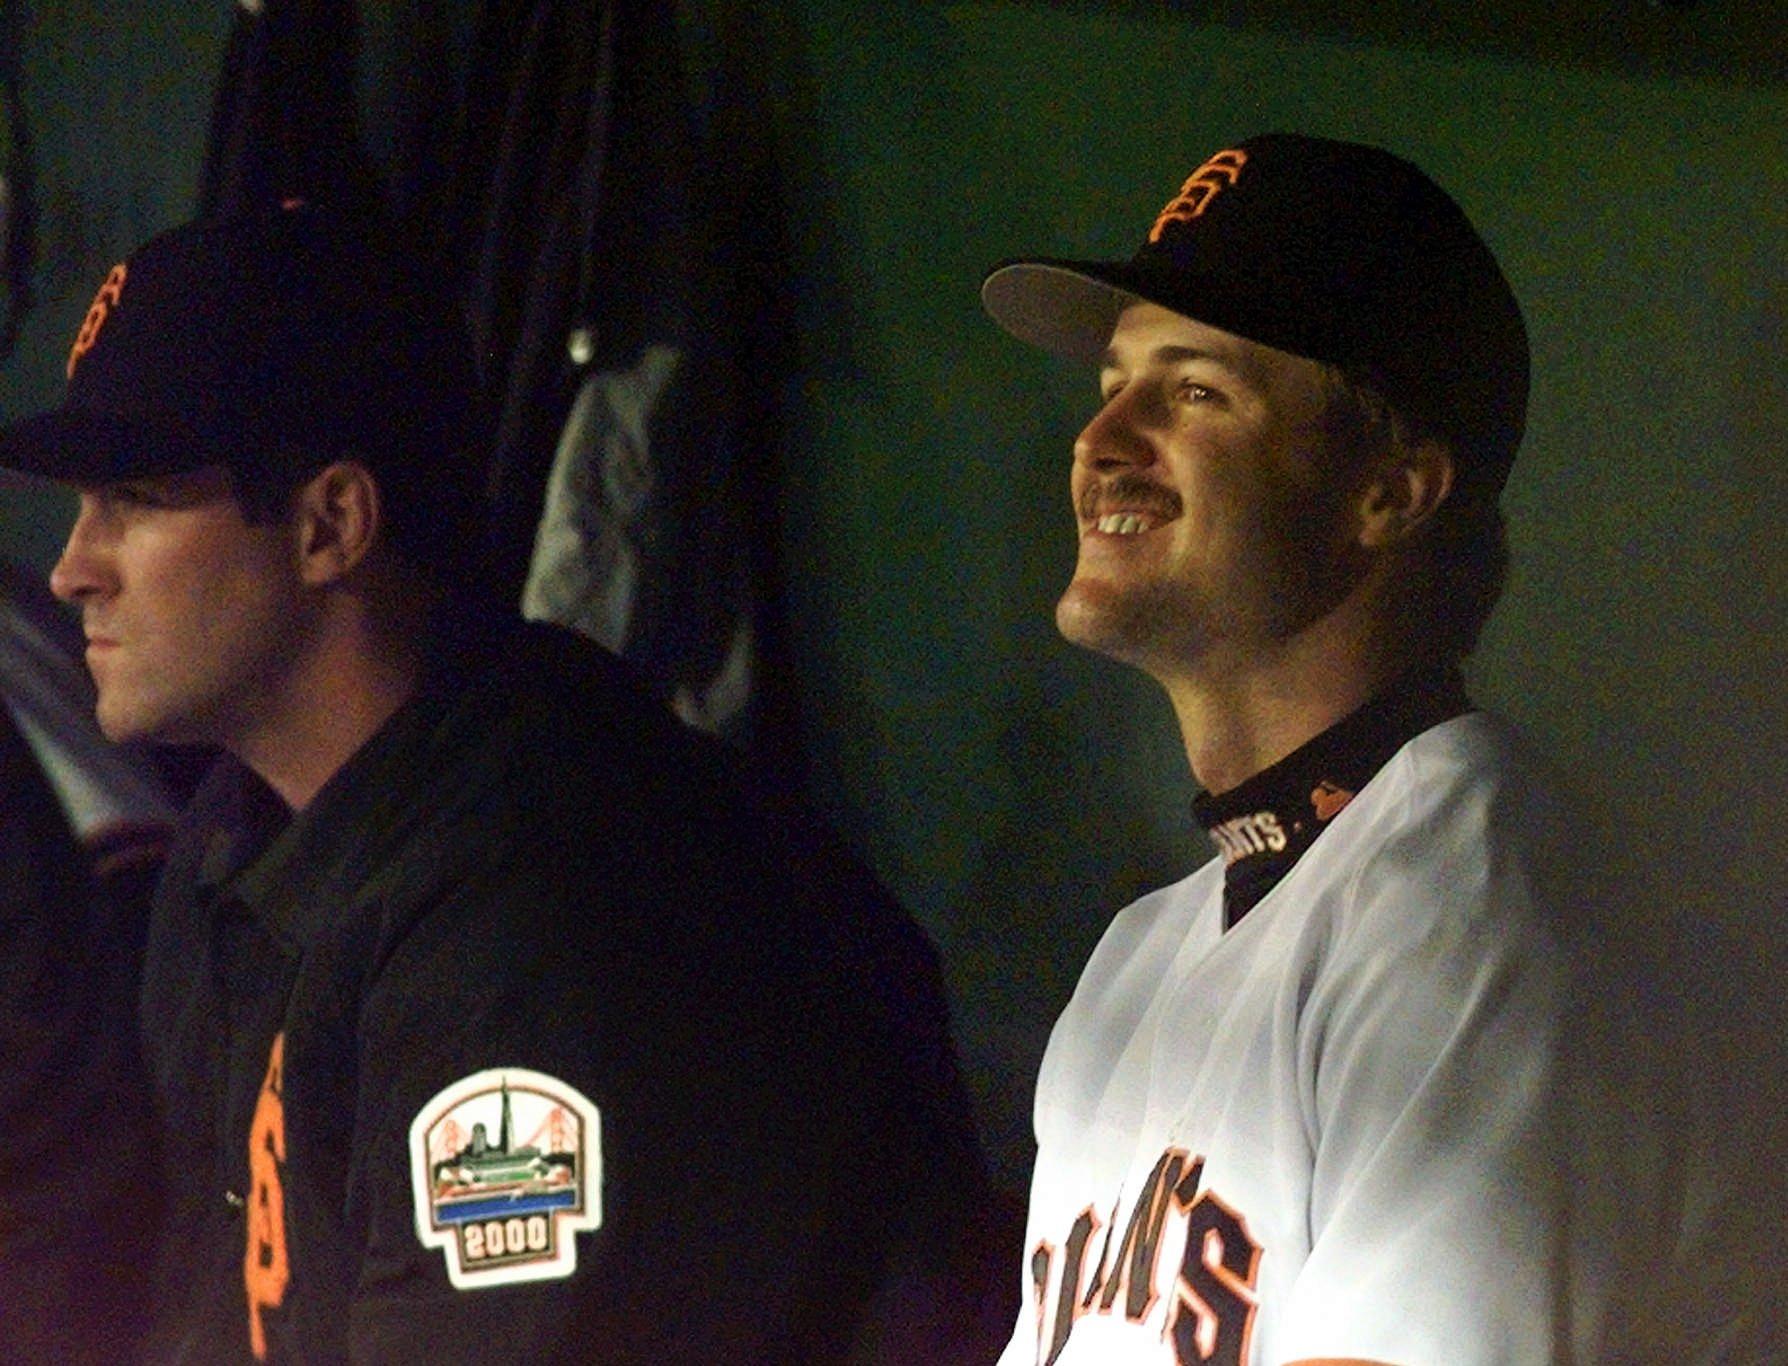 Why The Chronicle's Hall of Fame voters all put Jeff Kent on their